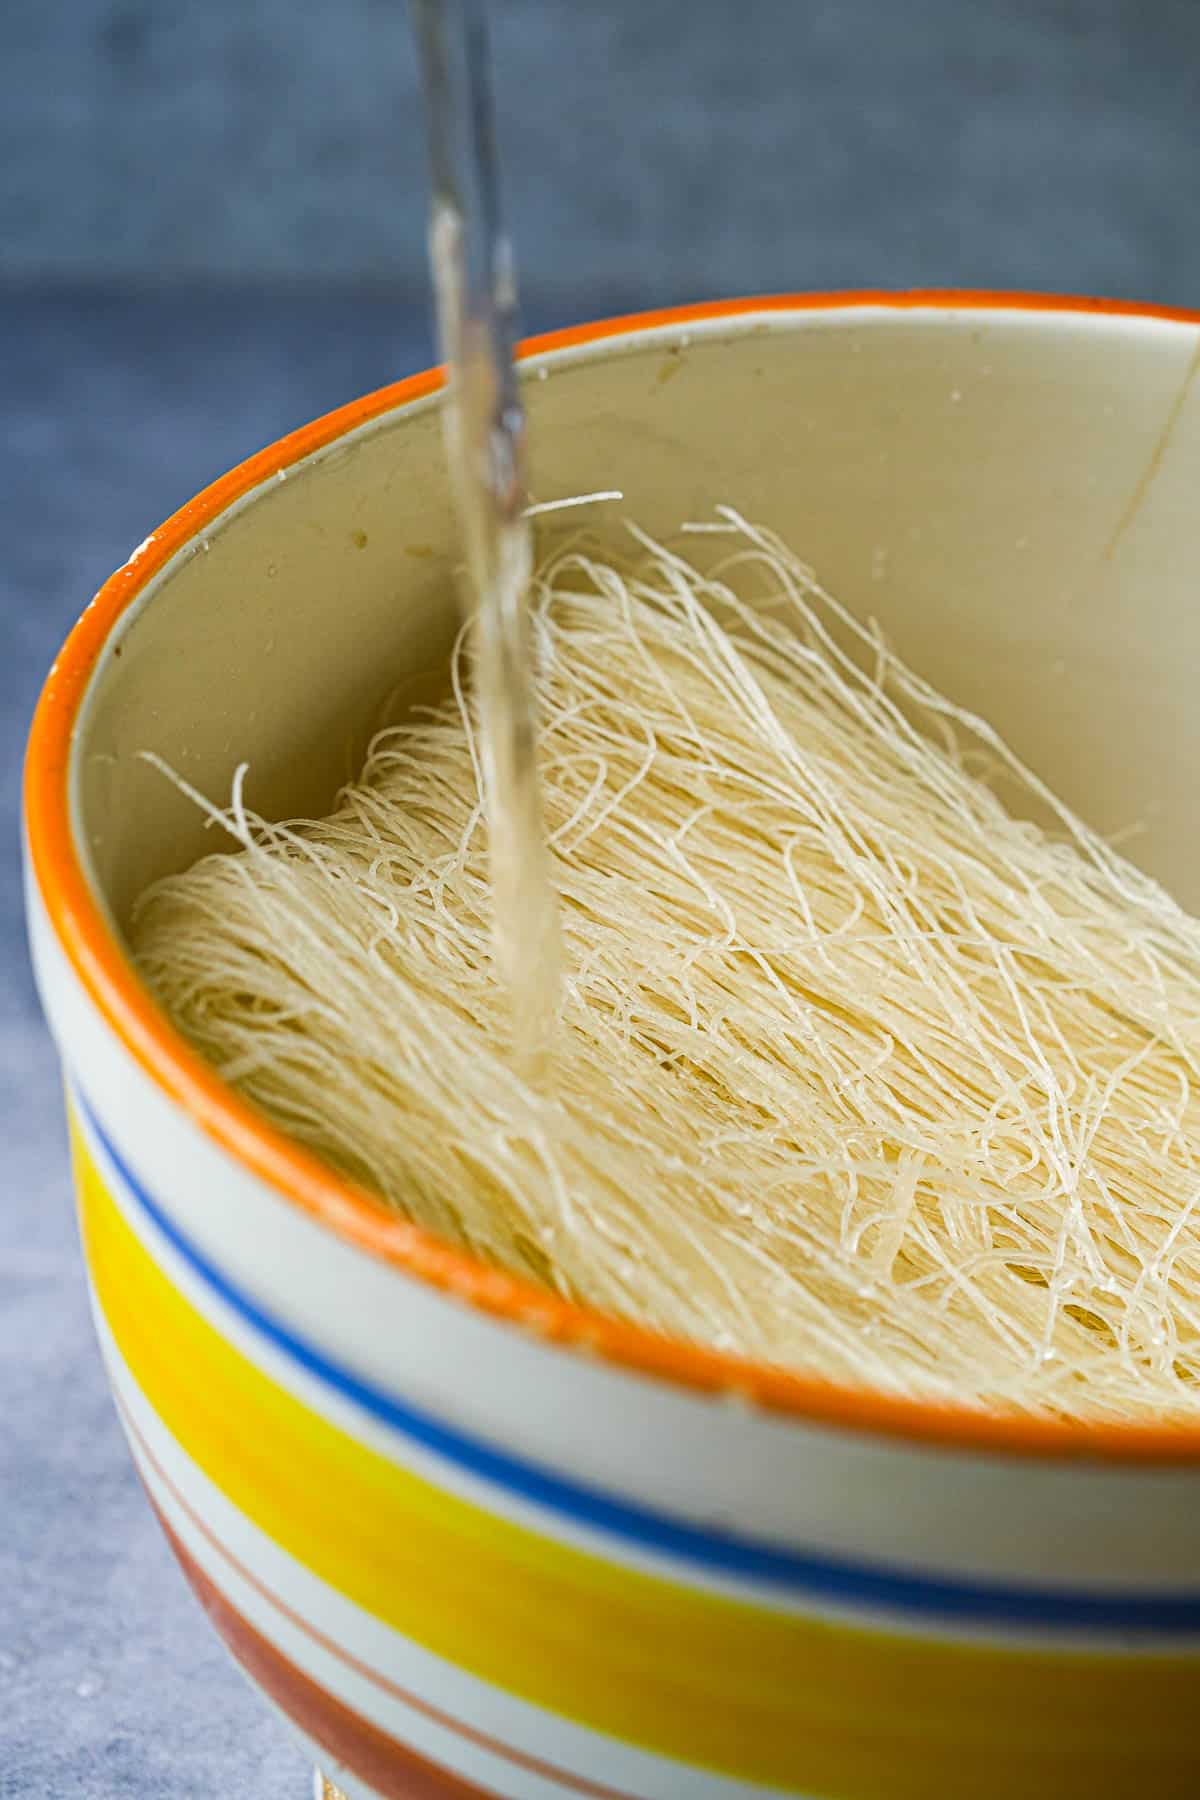 A ceramic bowl of noodles with water being poured into it.